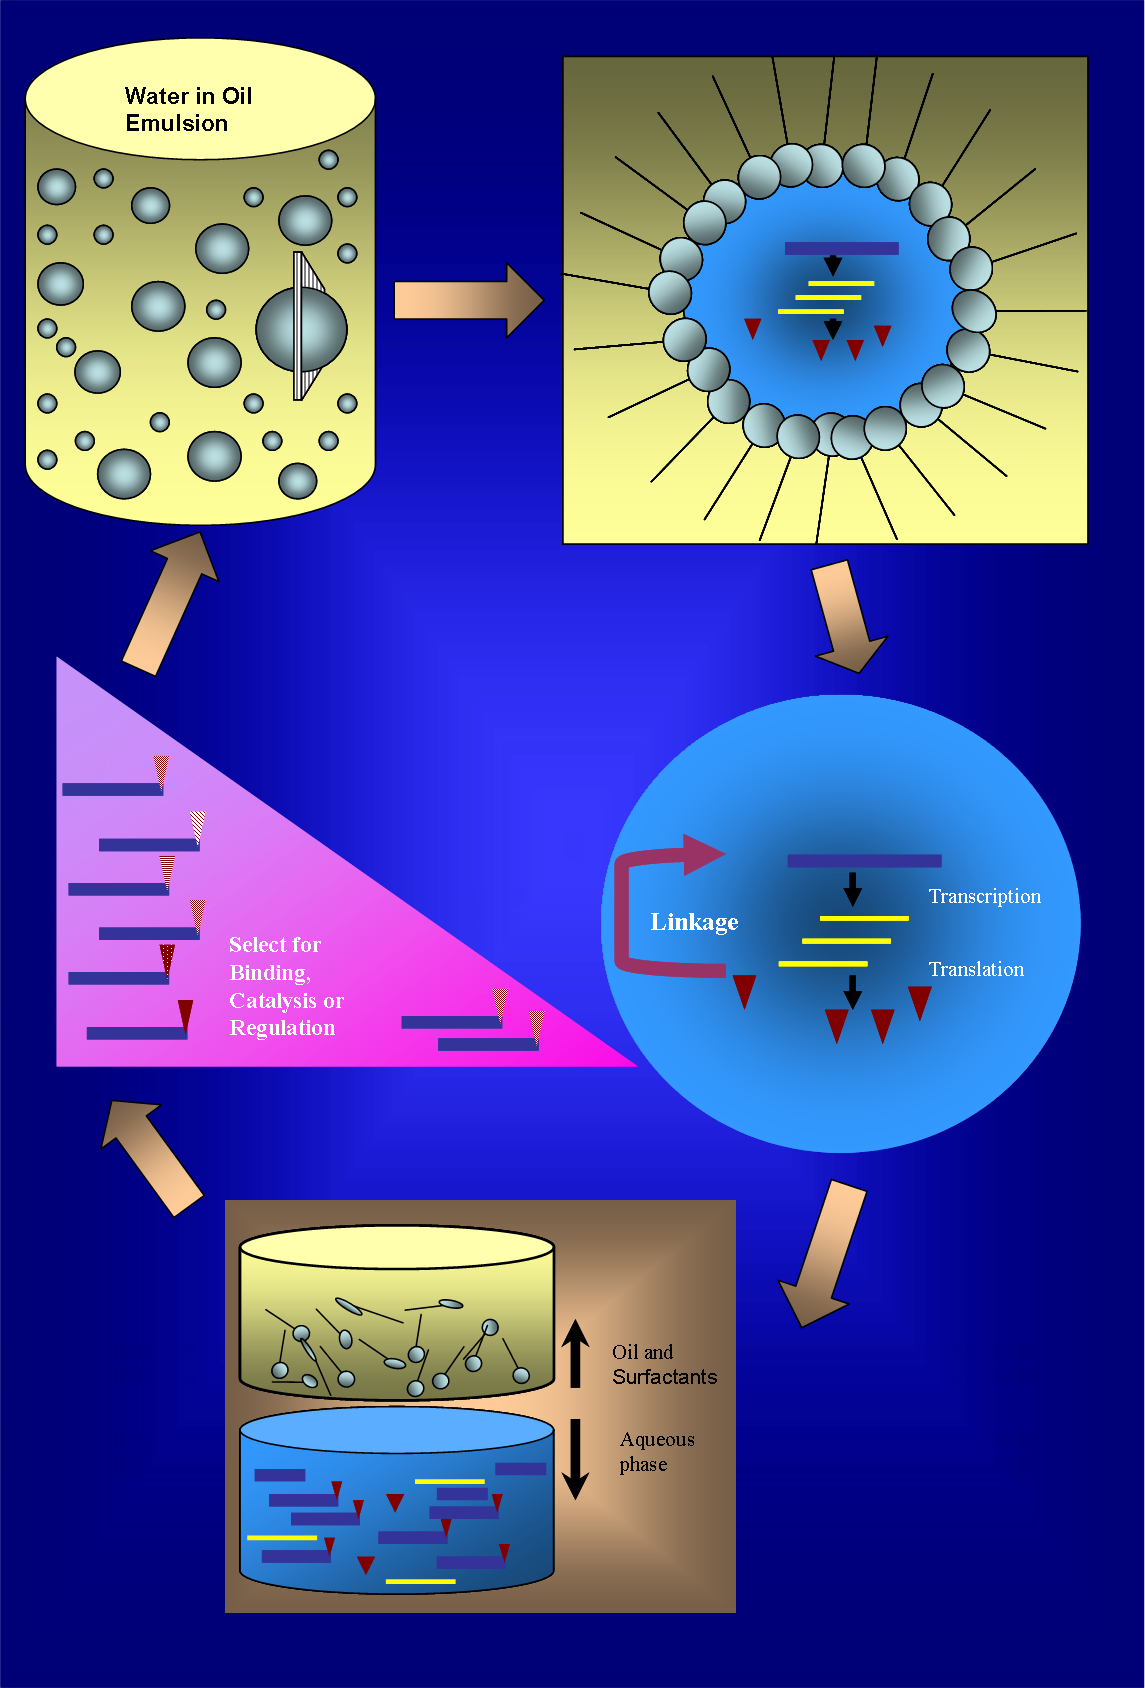 Why is compartmentalization in eukaryotic cells important?